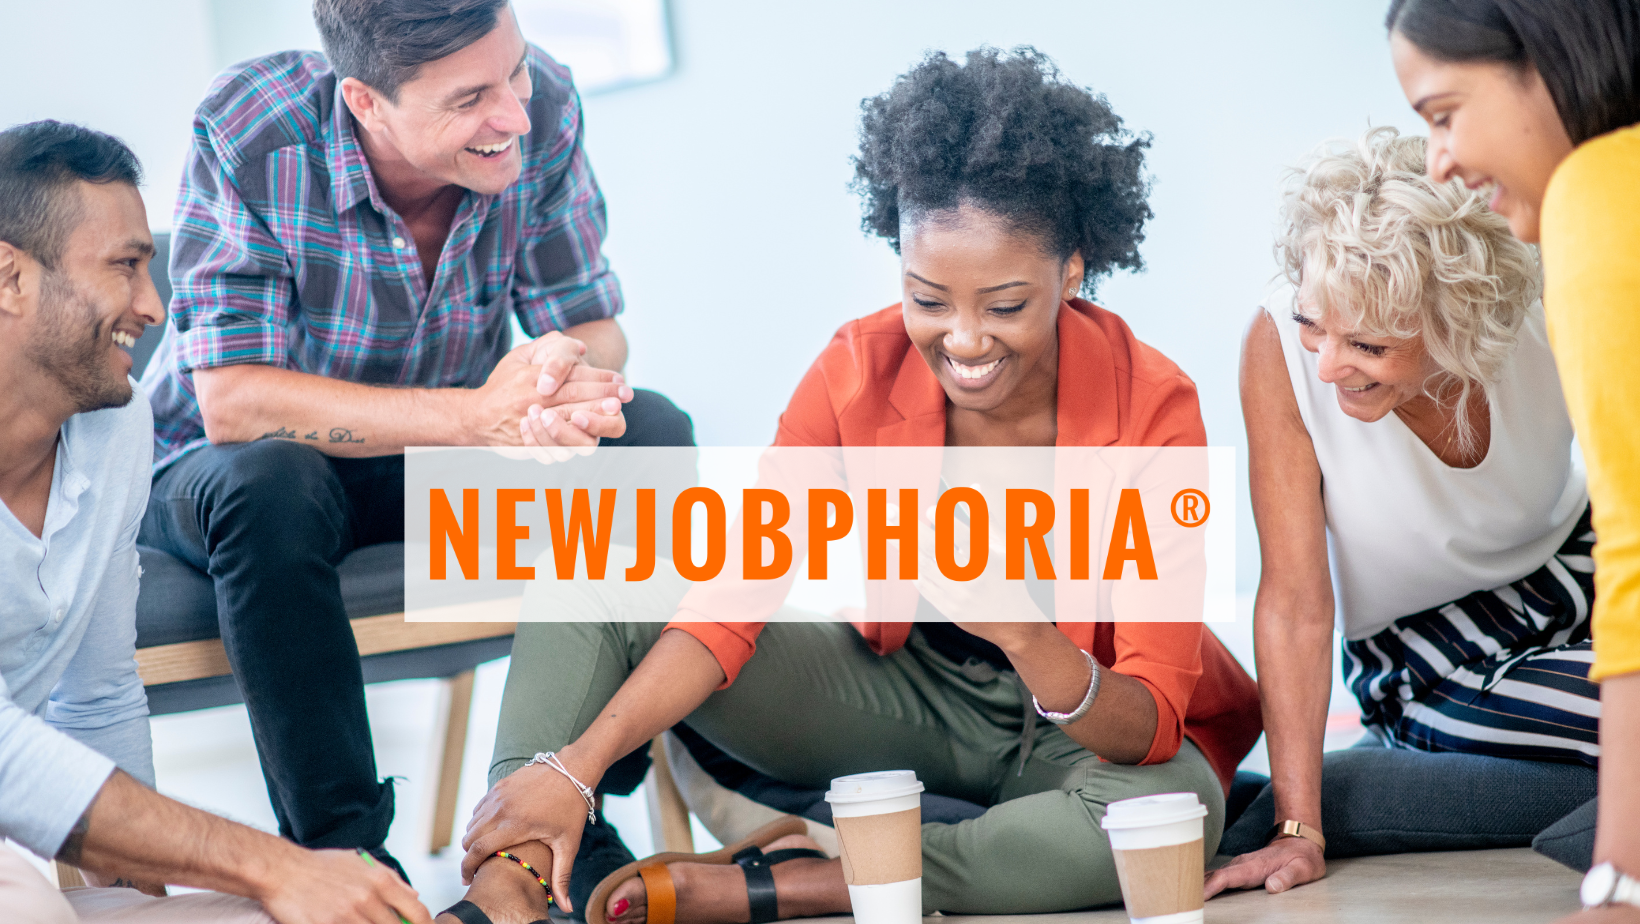 What does NEWJOBPHORIA® mean?